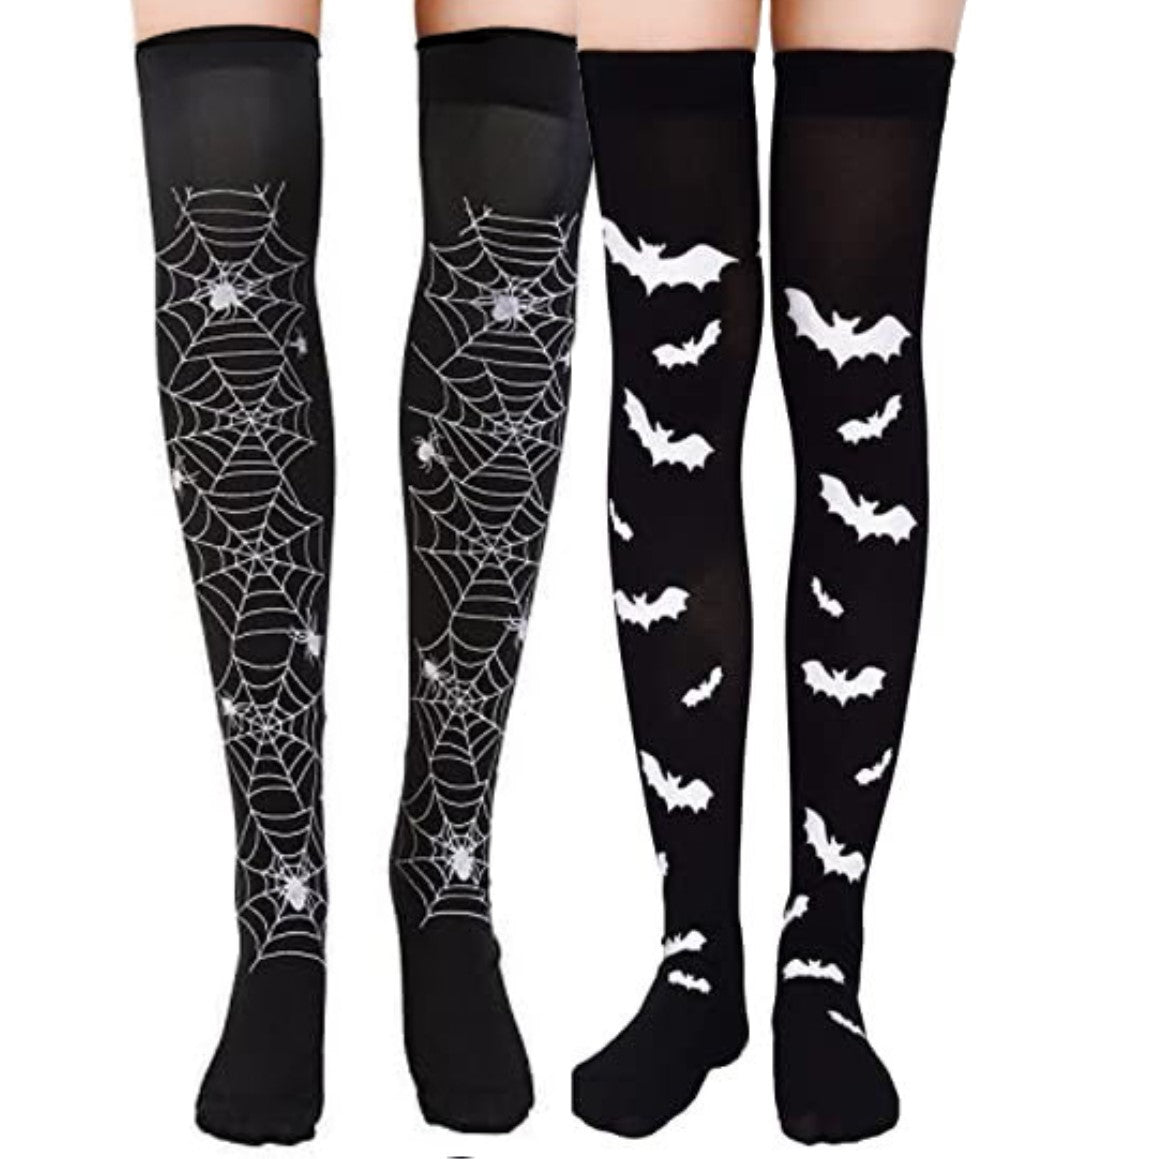 Ro Rox Over The Knee knitted Gothic Socks, Bat